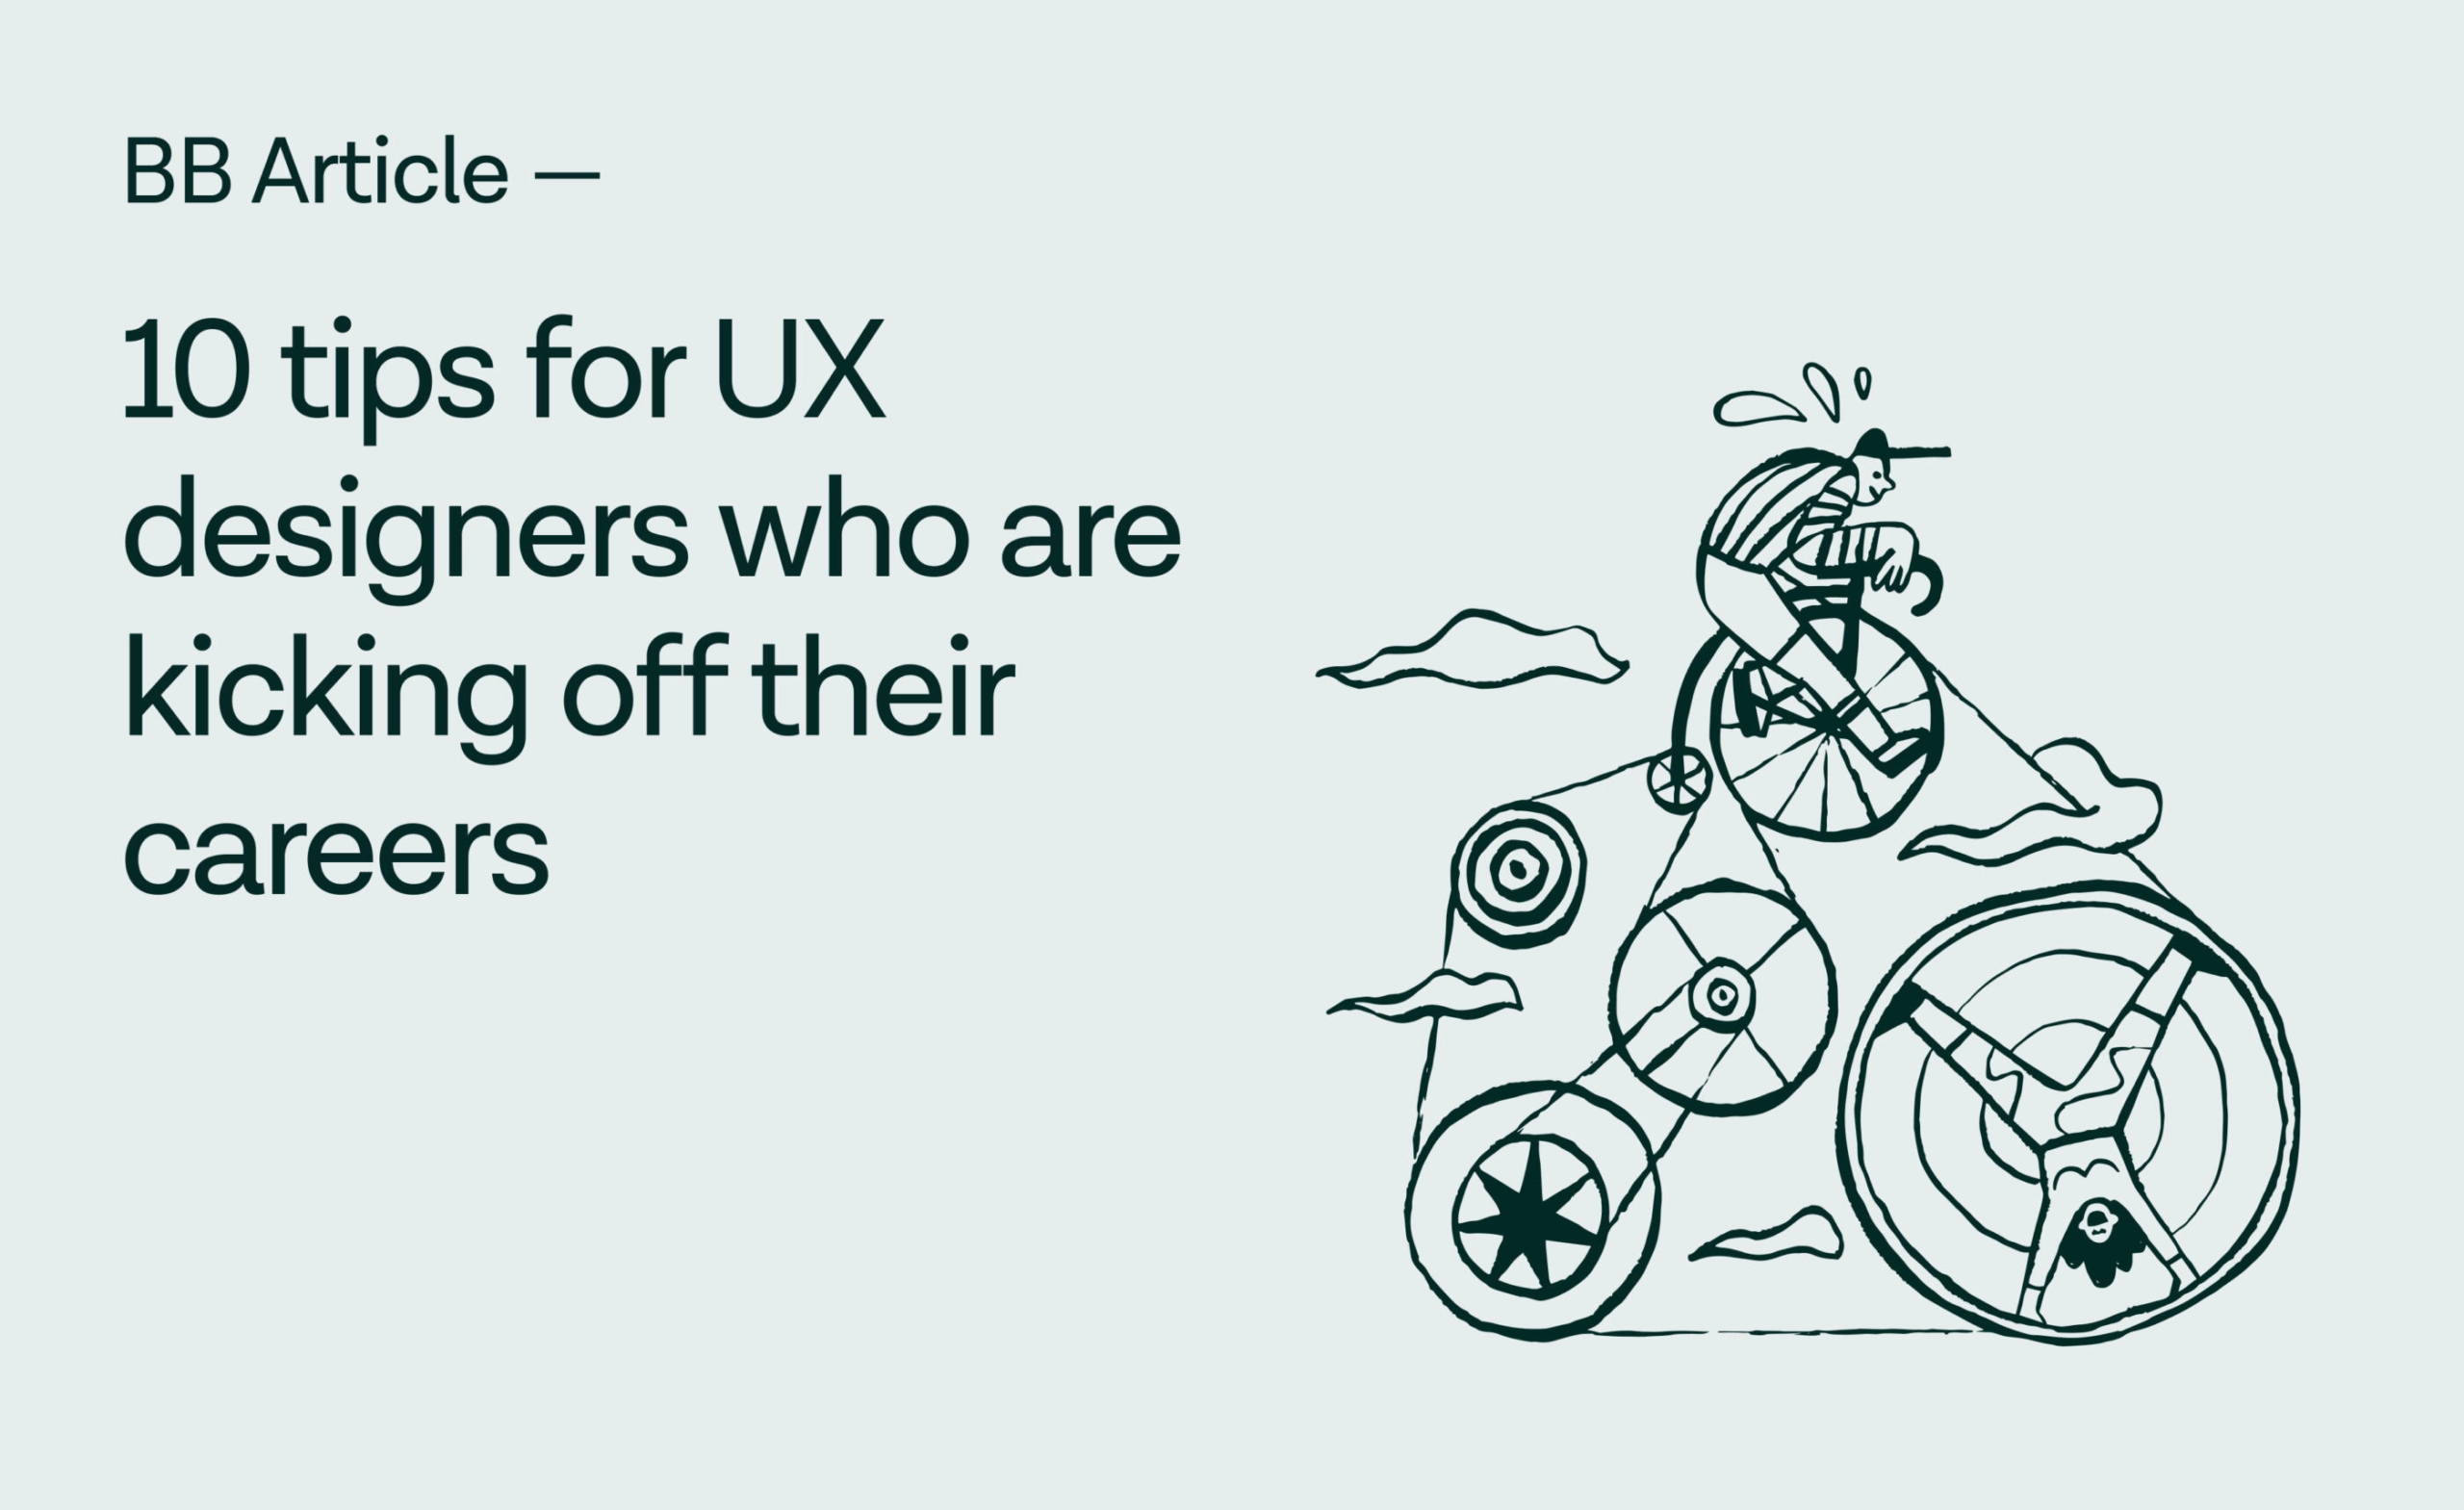 BB Agency cover visual from their article called 10 tips for UX designers who are kicking off their careers